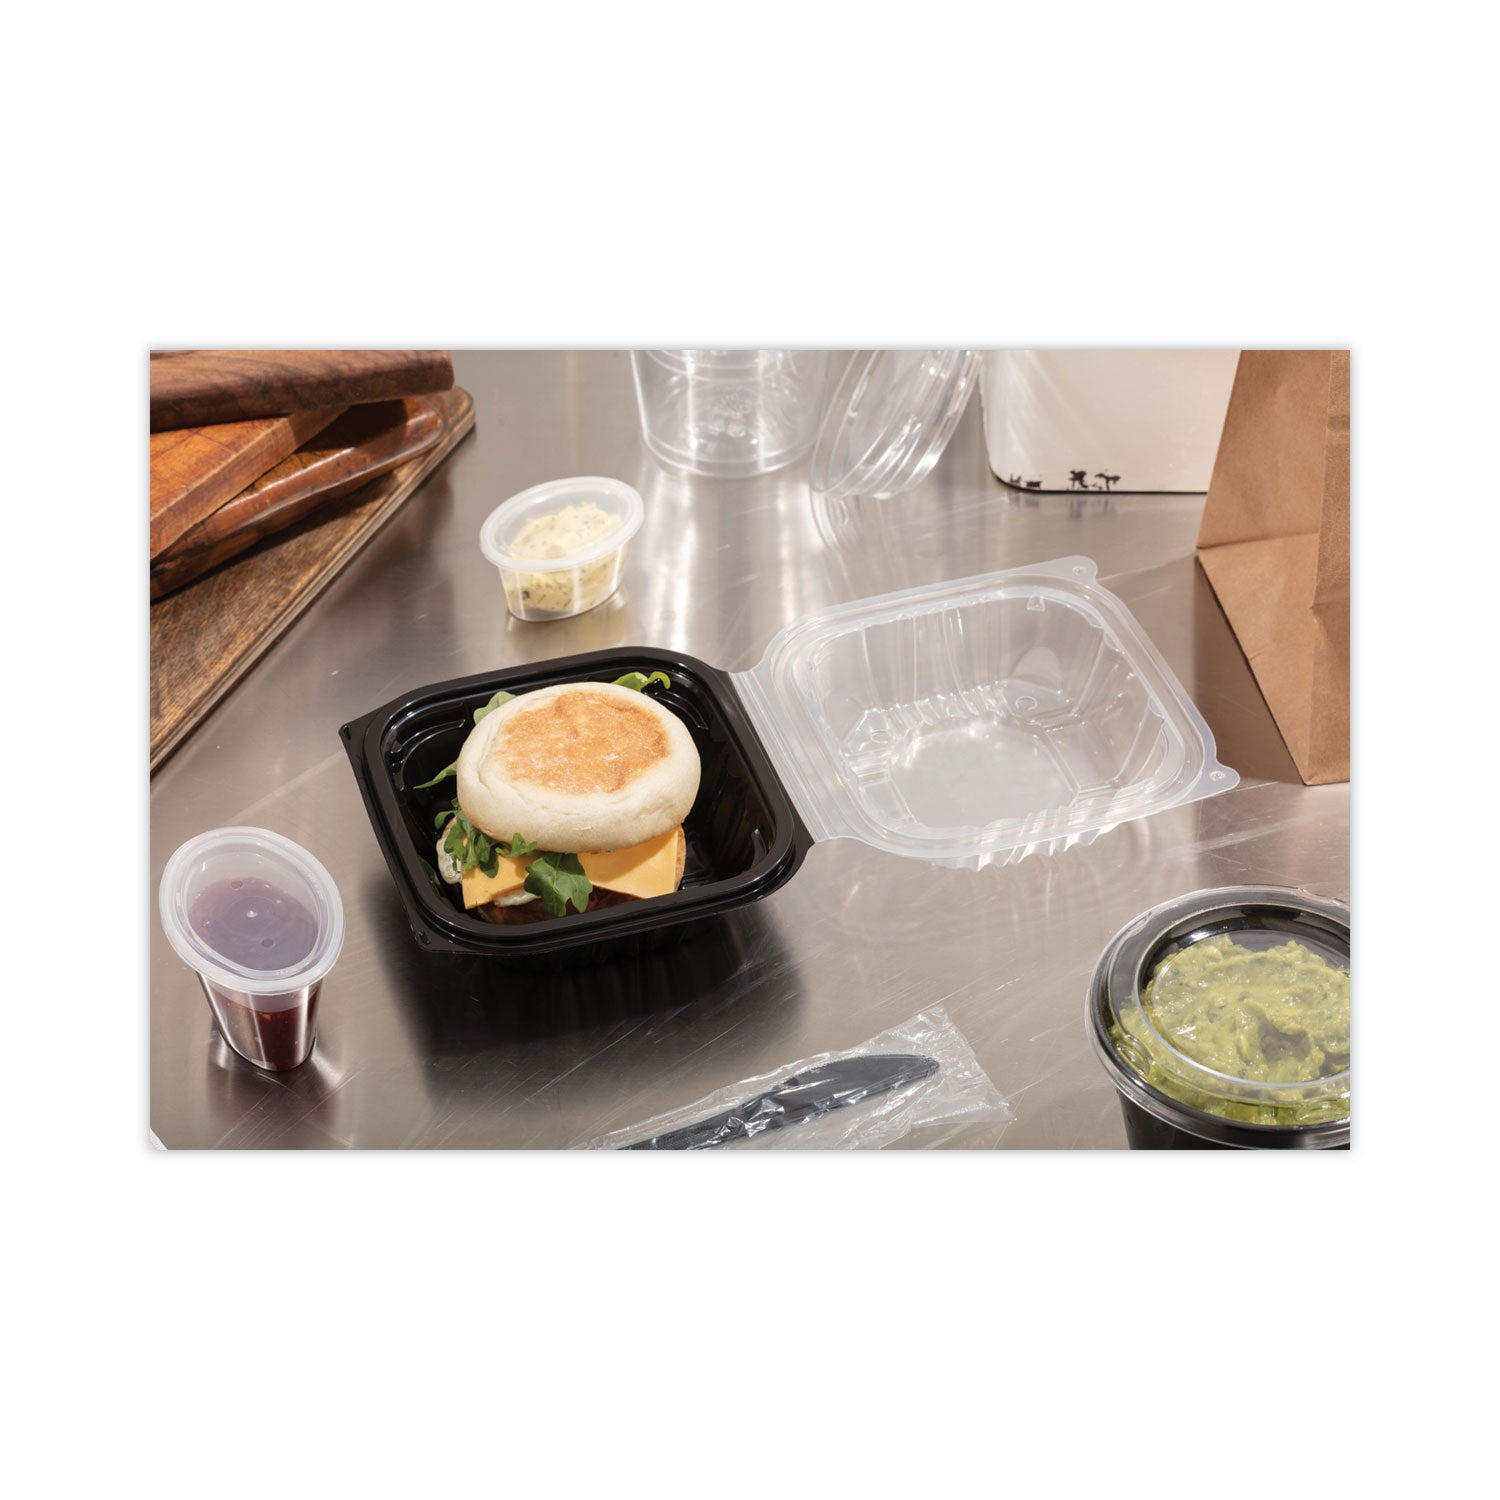 earthchoice-vented-dual-color-microwavable-hinged-lid-container-1-compartment-16oz-6-x-6-x-3-black-clear-plastic-321-ct_pctdc6610b000 - 4